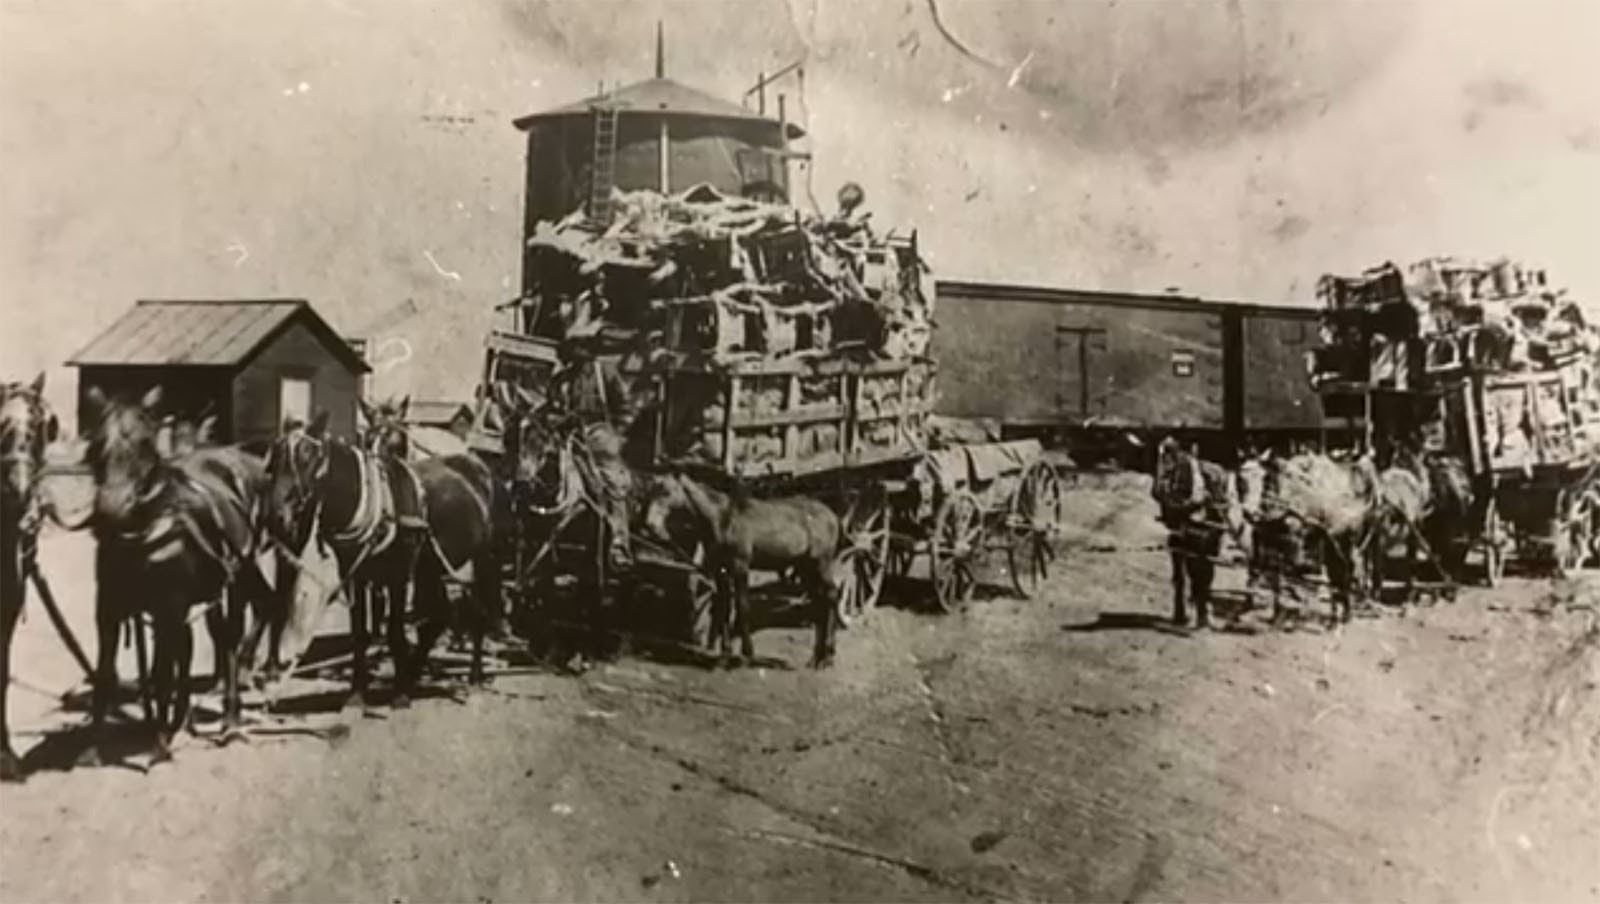 Overloaded wagons pulled by horses take the furnishings of the new Emery Hotel from the train to the hotel in Thermopolis in 1907.